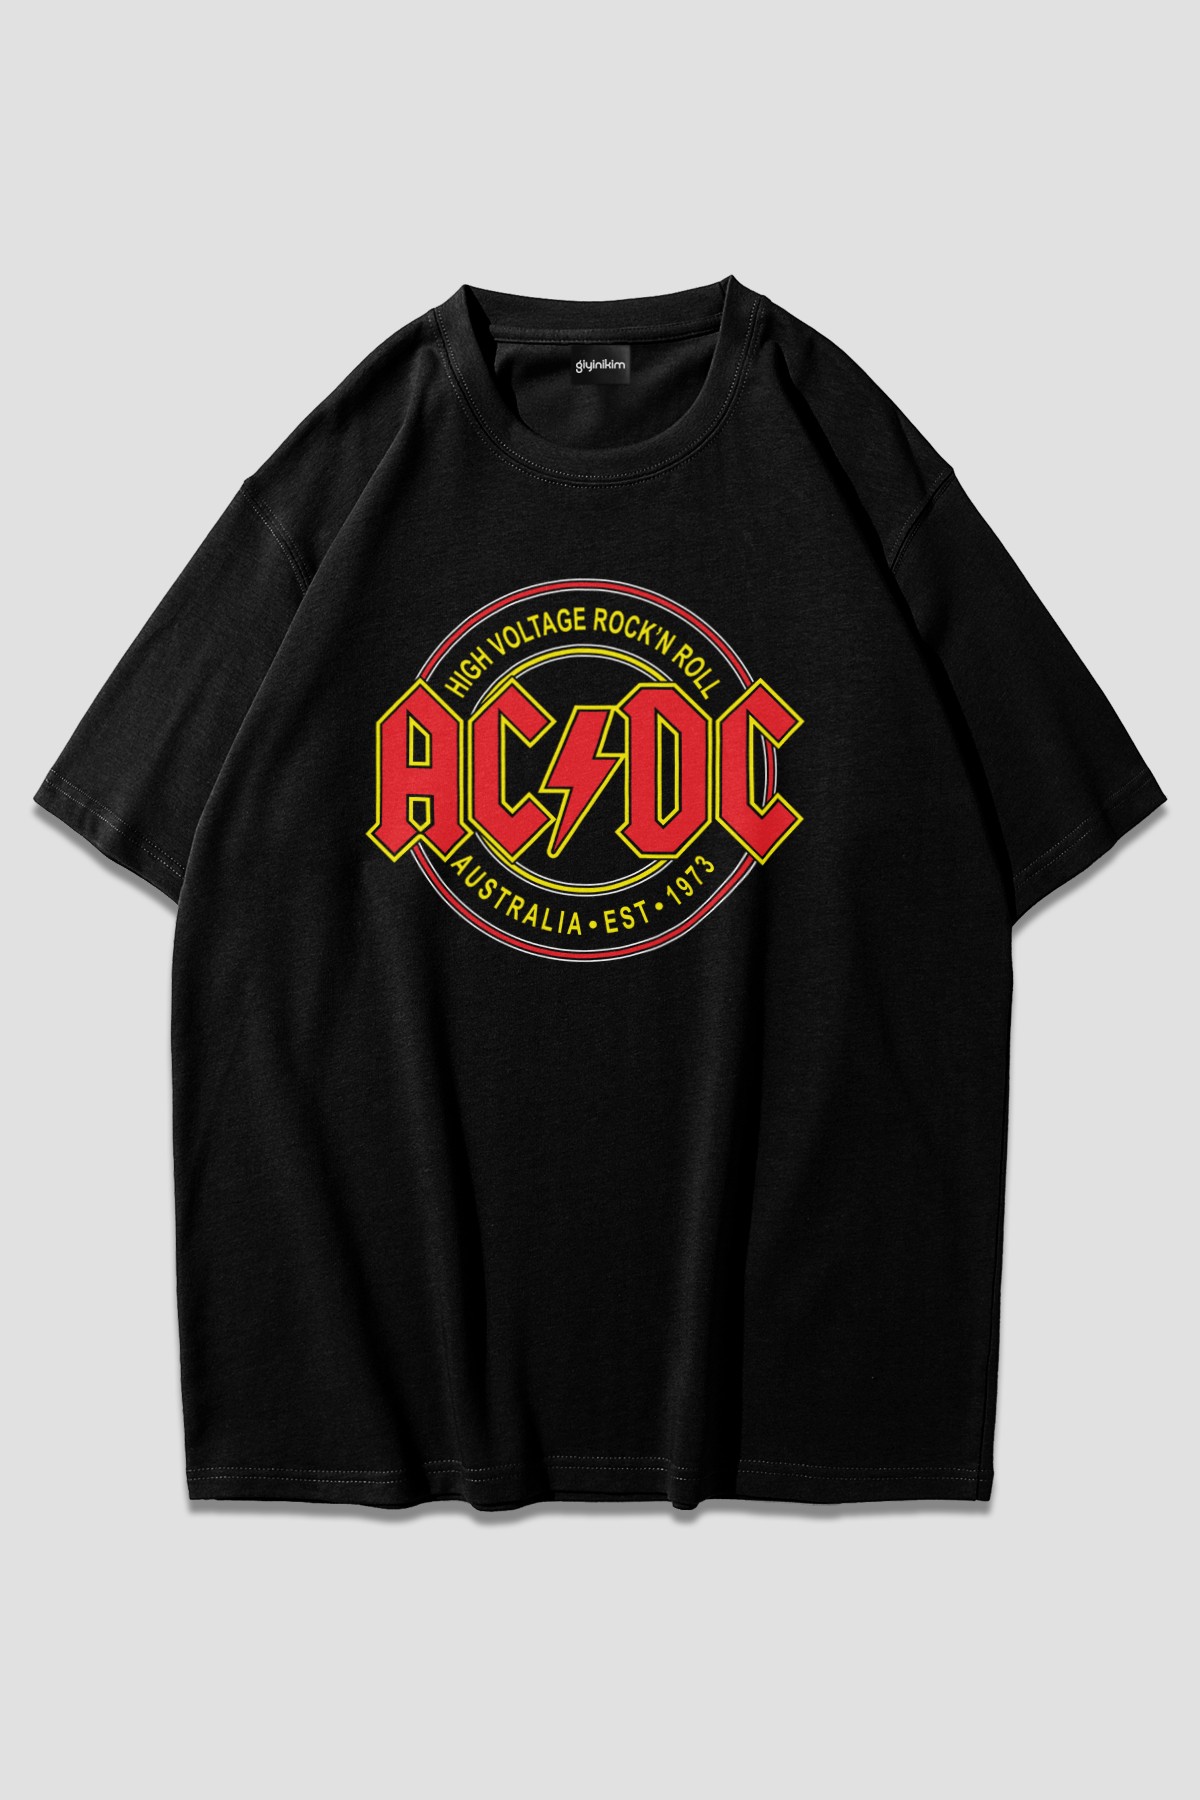 ACDC High Voltage Oversize Siyah T-Shirt